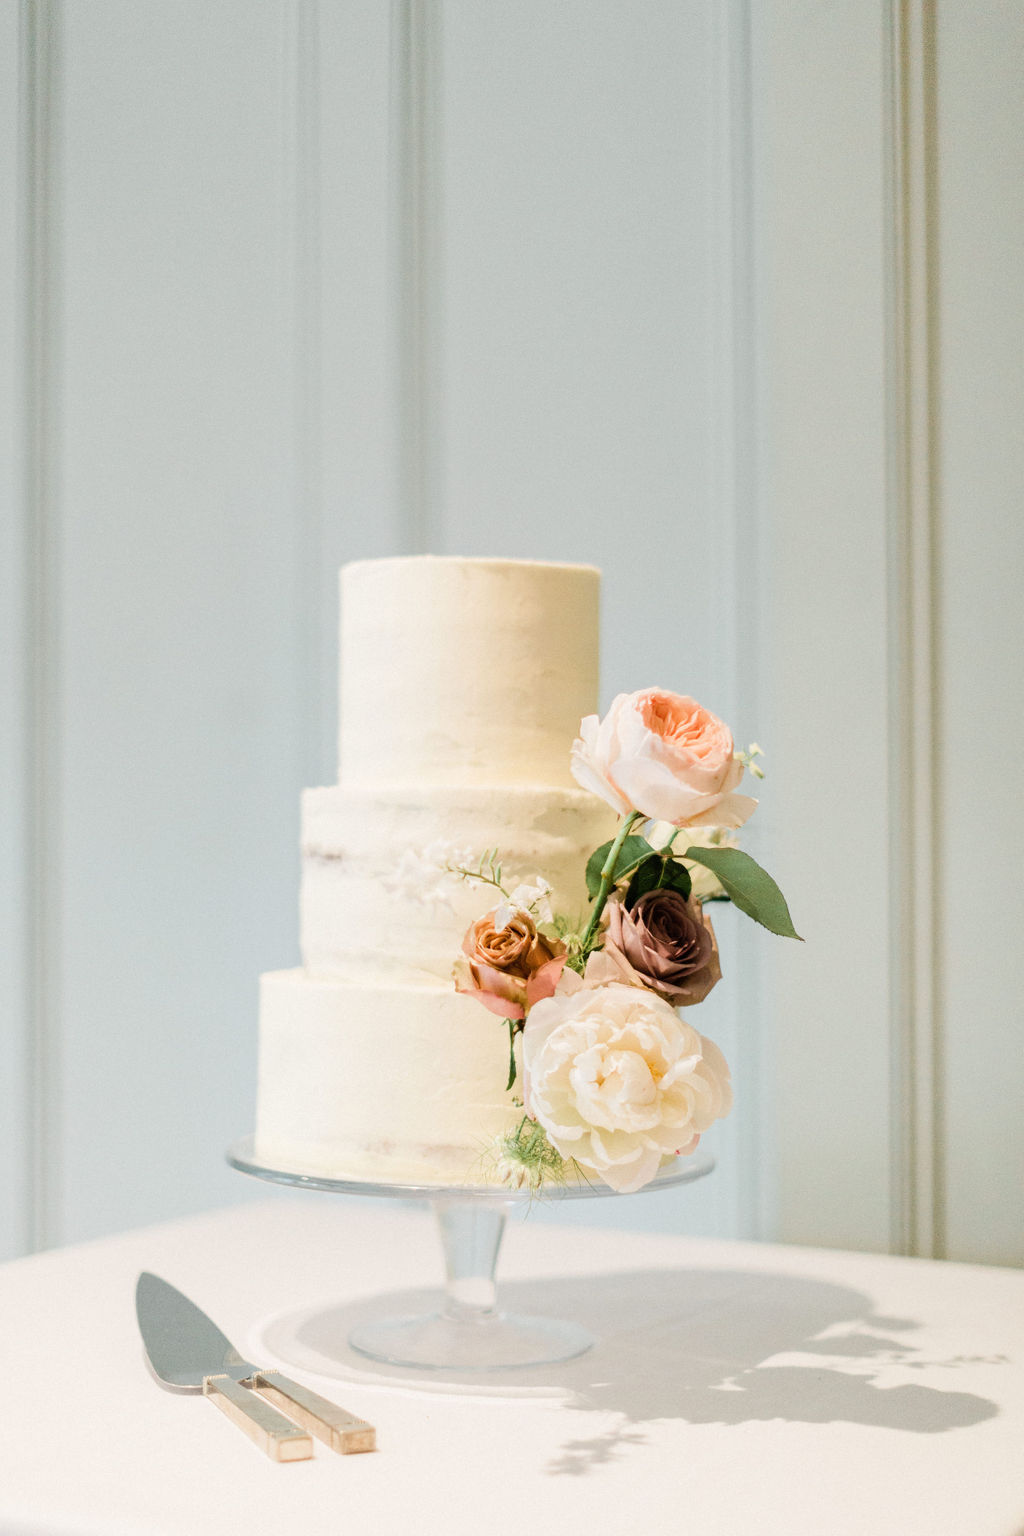 Understated, simply beautiful buttercream wedding cake decorated with a flourish of fresh flowers. Photo by Jacob & Pauline